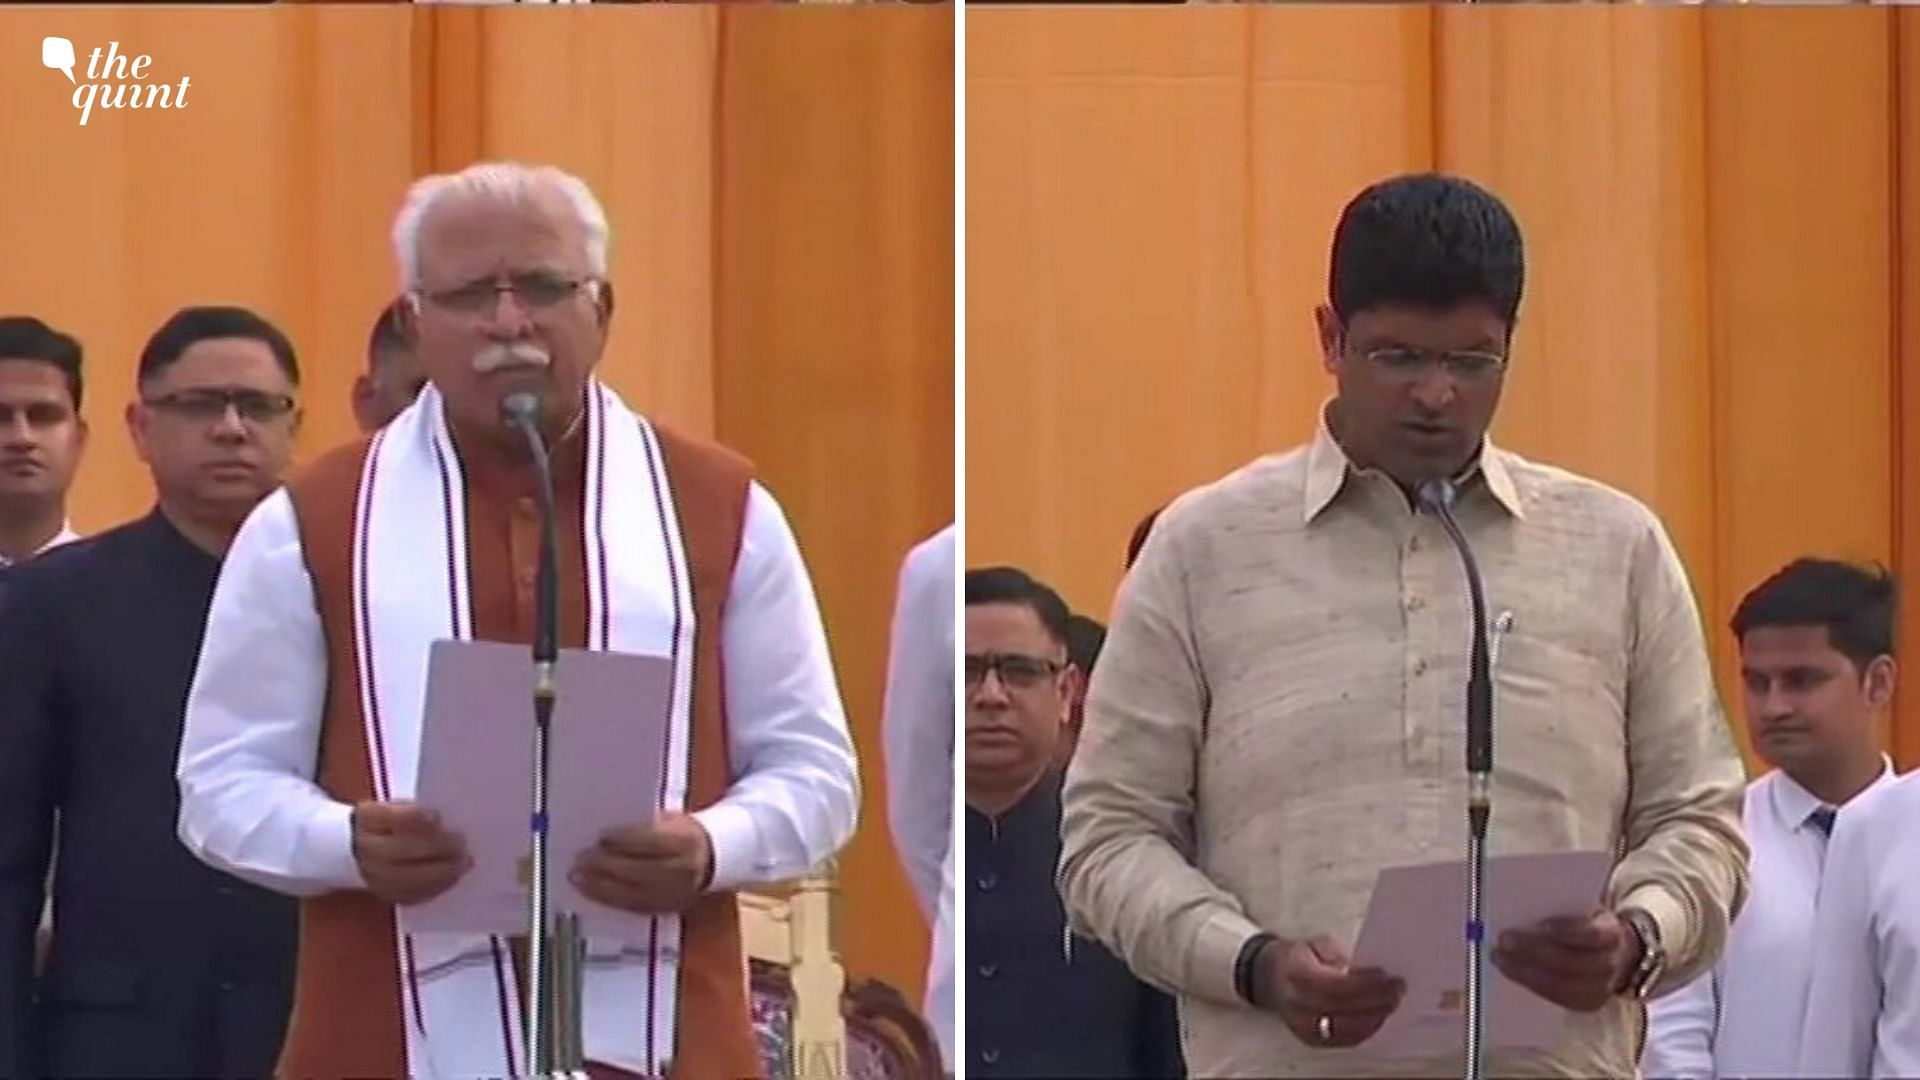 Manohar Lal Khattar on Sunday, 27 October took oath as the chief minister of Haryana for a historic second consecutive term, along with JJP leader Dushyant Chautala as the deputy chief minister.